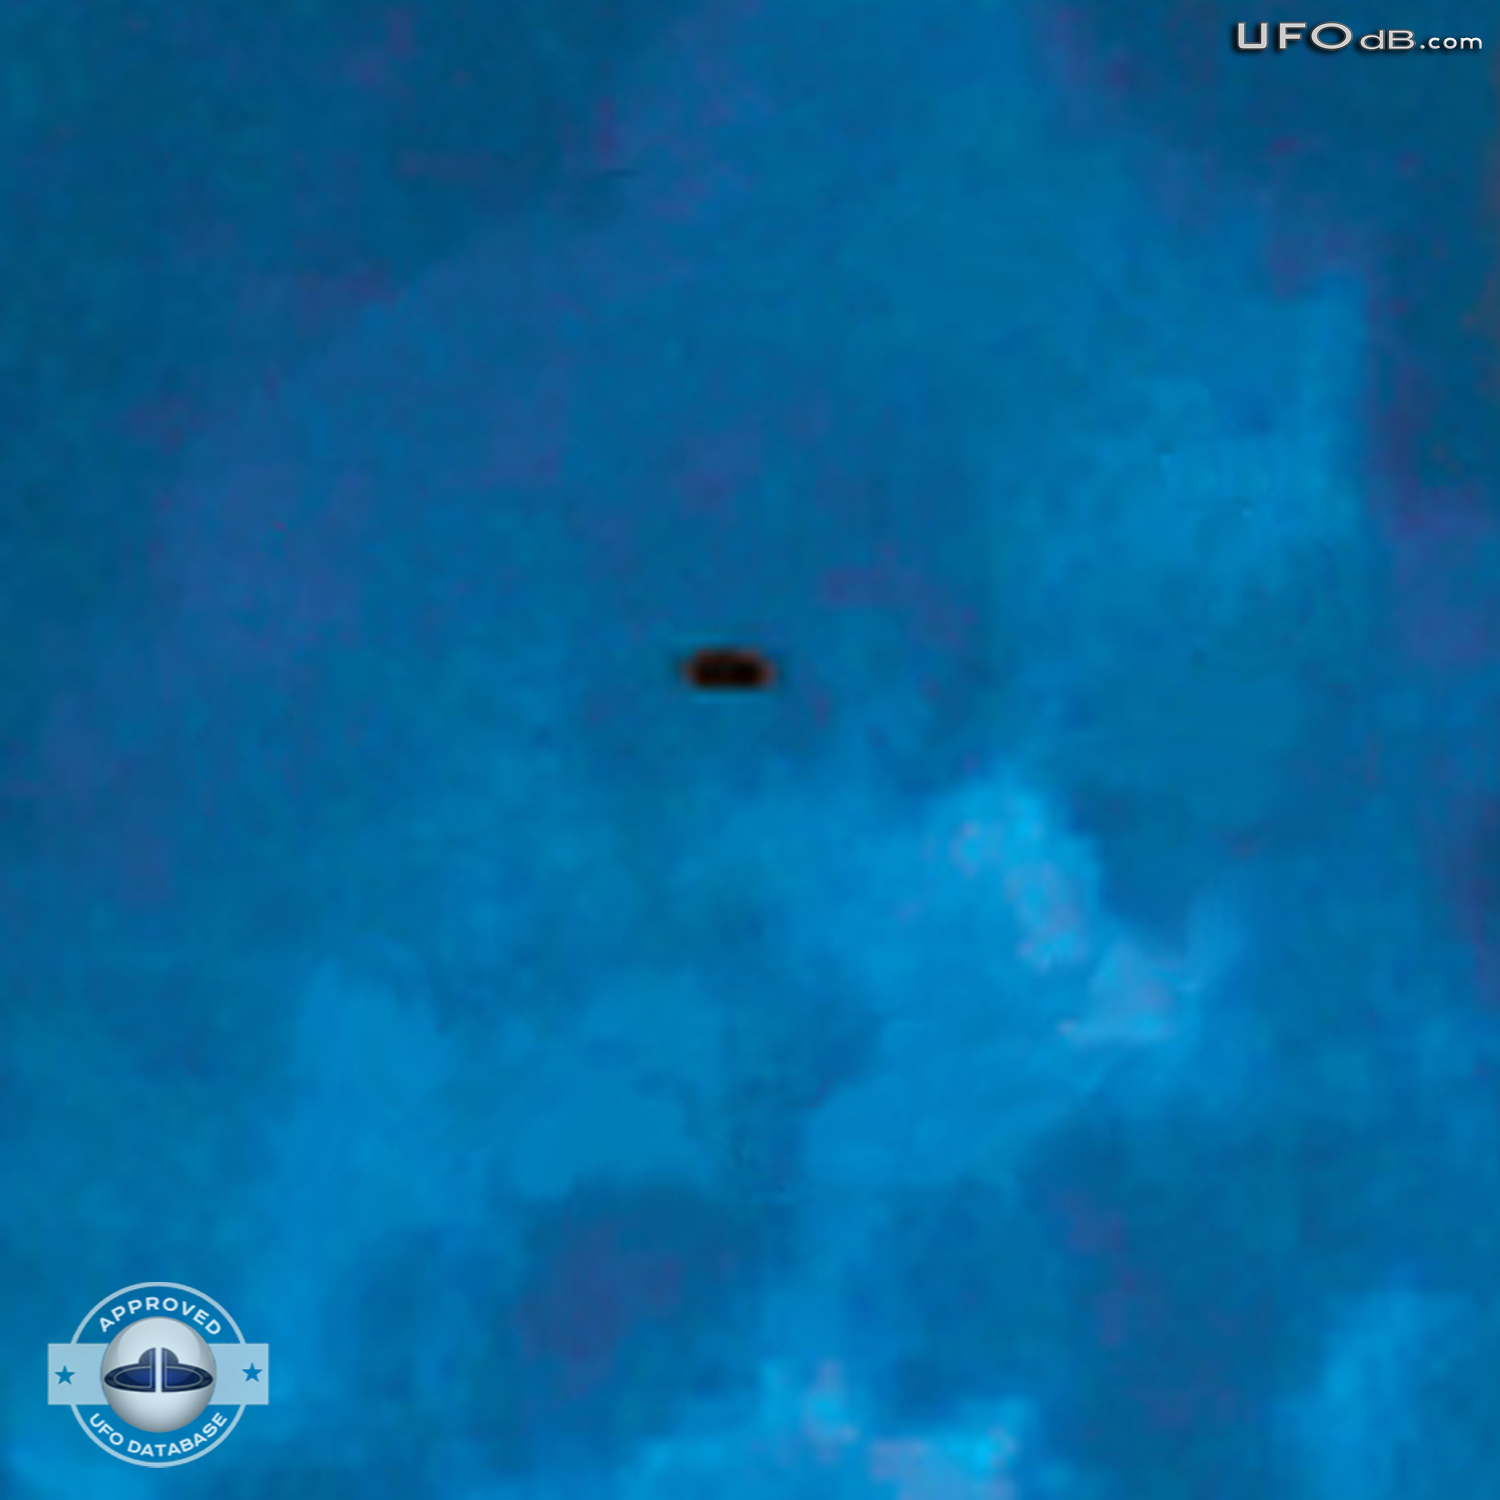 Dongguan Students get controversial UFO picture | China | May 11 2011 UFO Picture #289-4